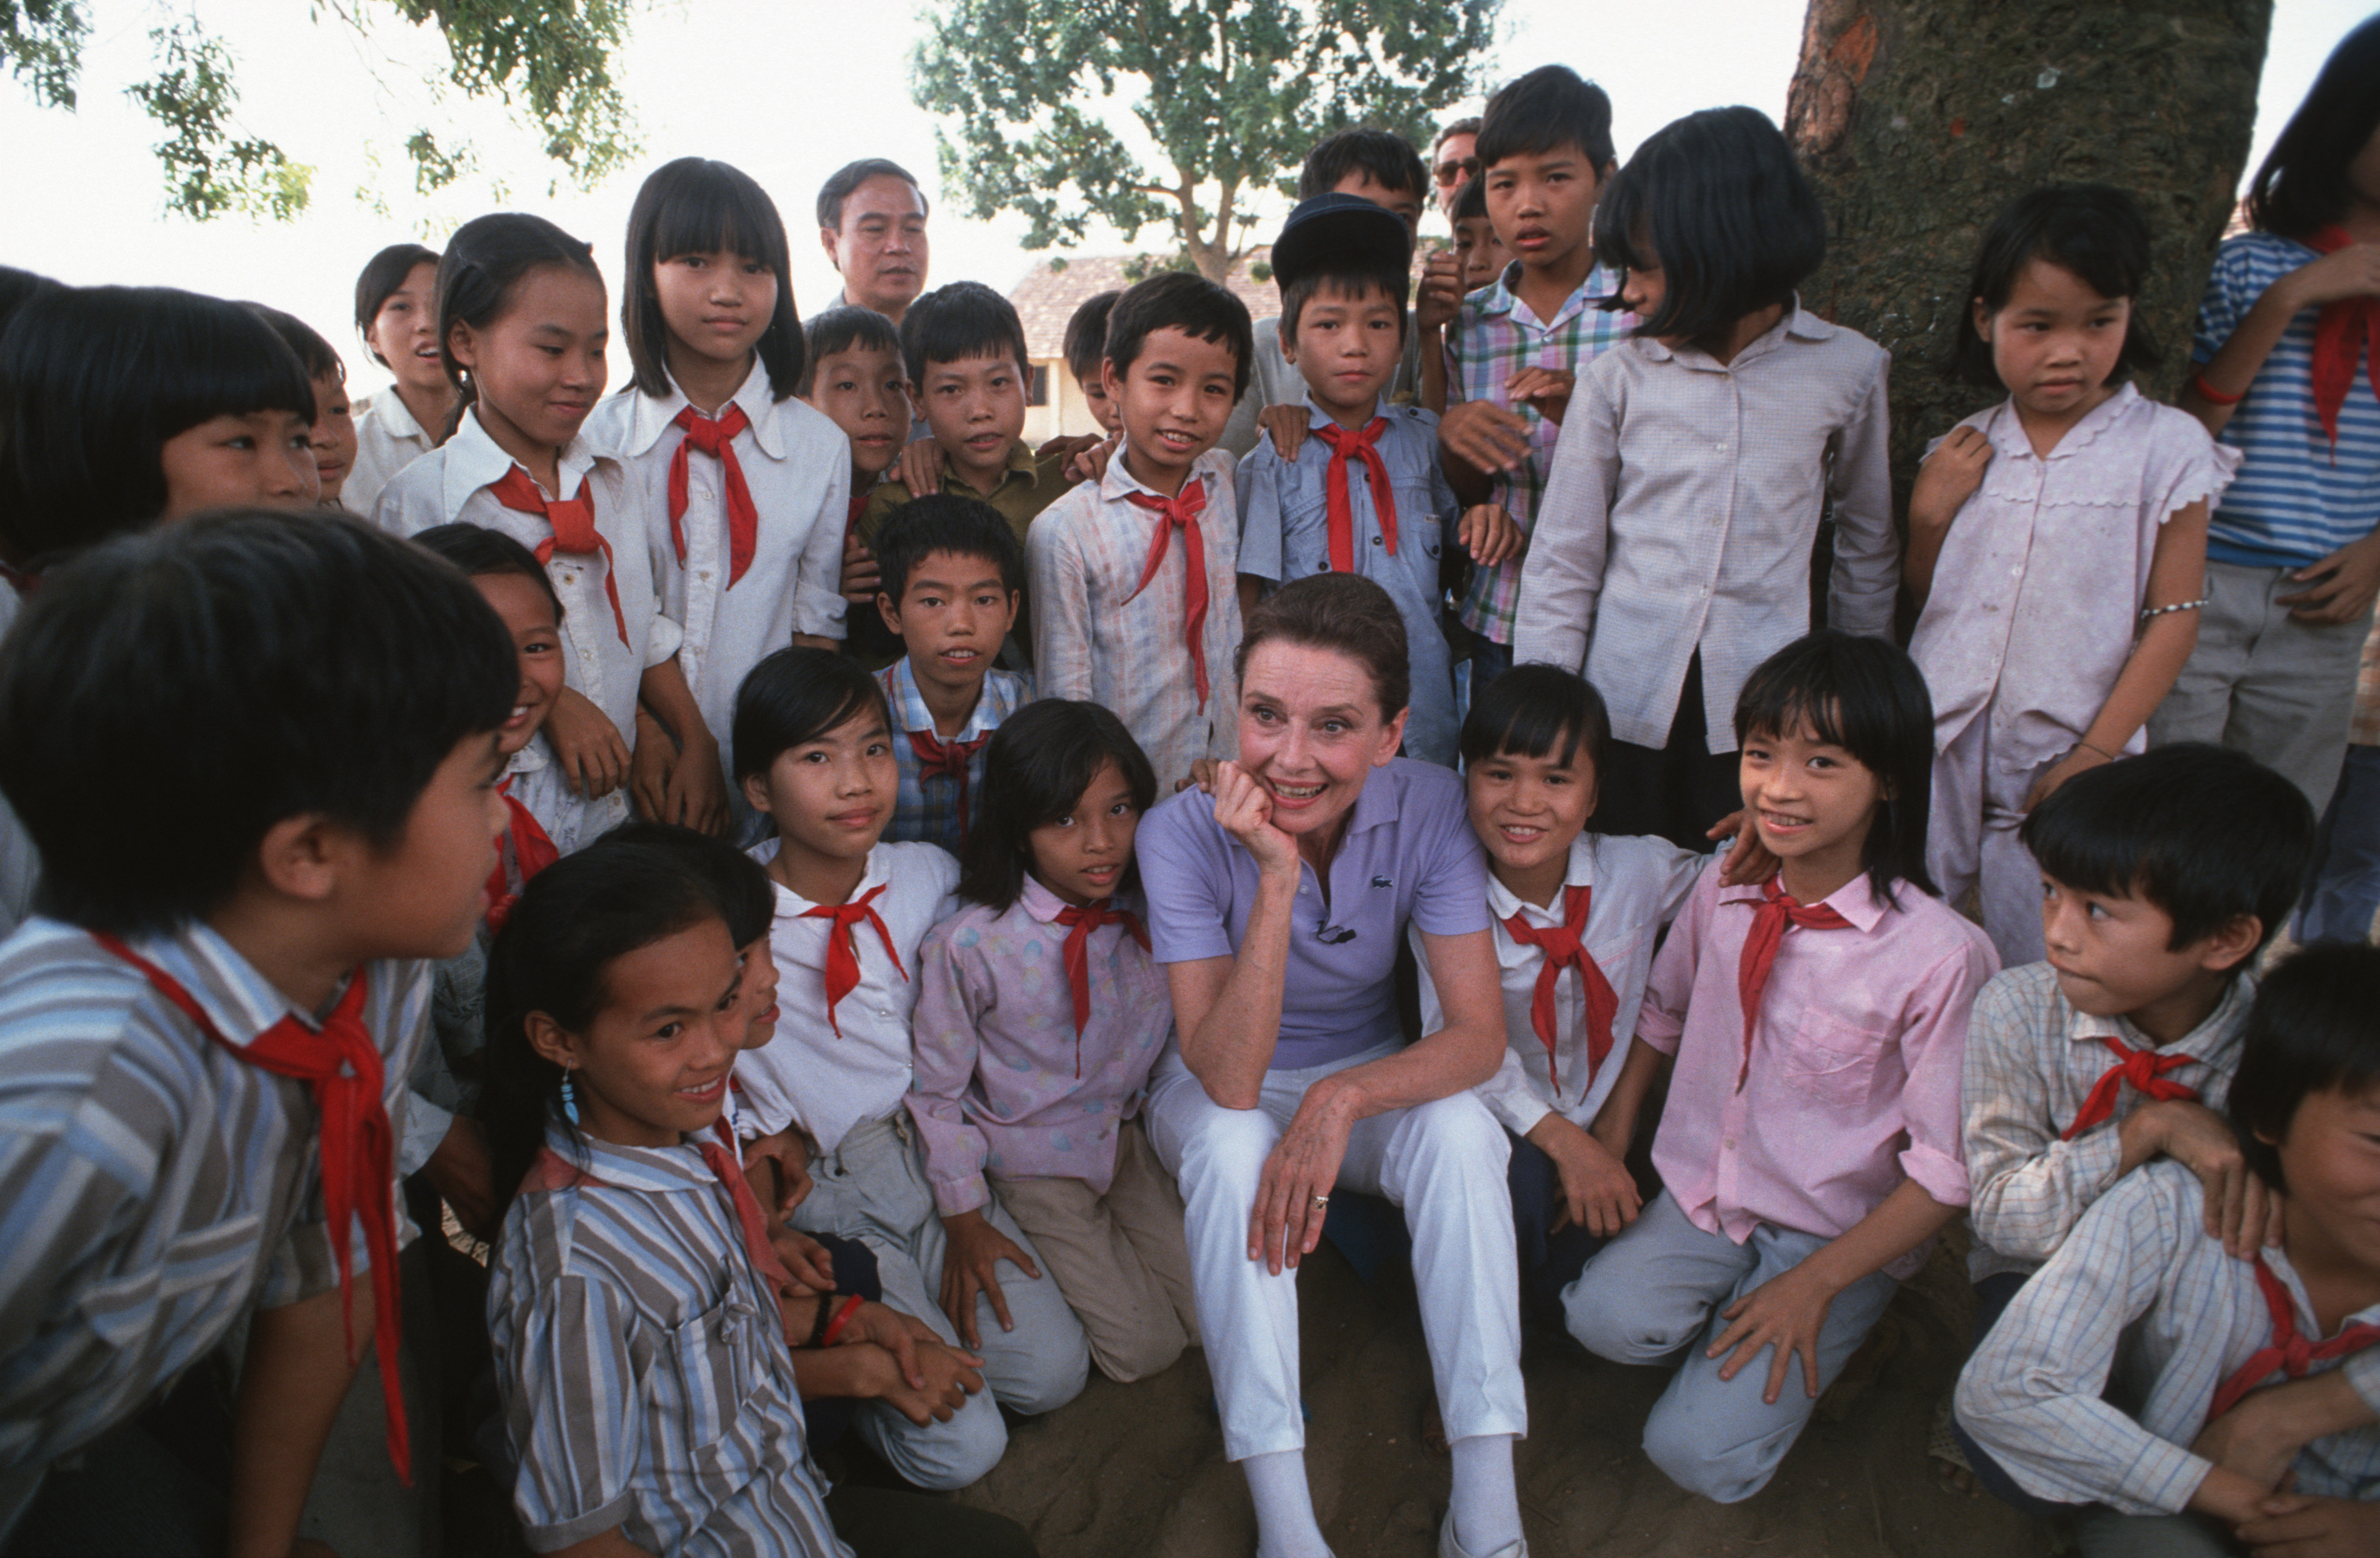 Audrey Hepburn takes time to get to know some schoolchildren in uniform in a small village close to Hanoi on October 1, 1990 | Source: Getty Images